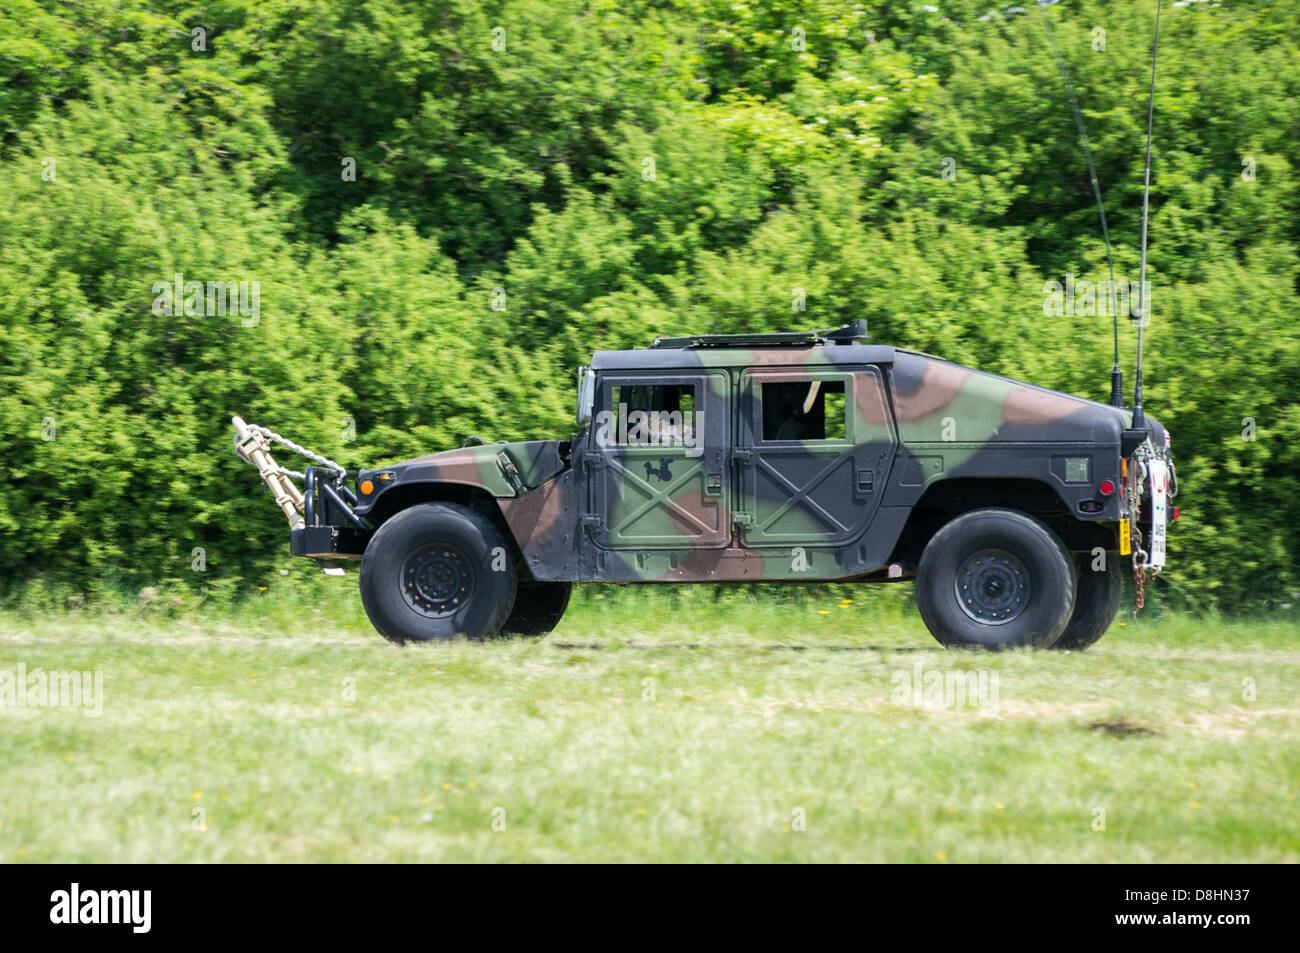 Humvee (High Mobility Multipurpose Wheeled Vehicle), British Army, displays at the 2013 Denmead Overlord, D-Day re-enactments. Stock Photo